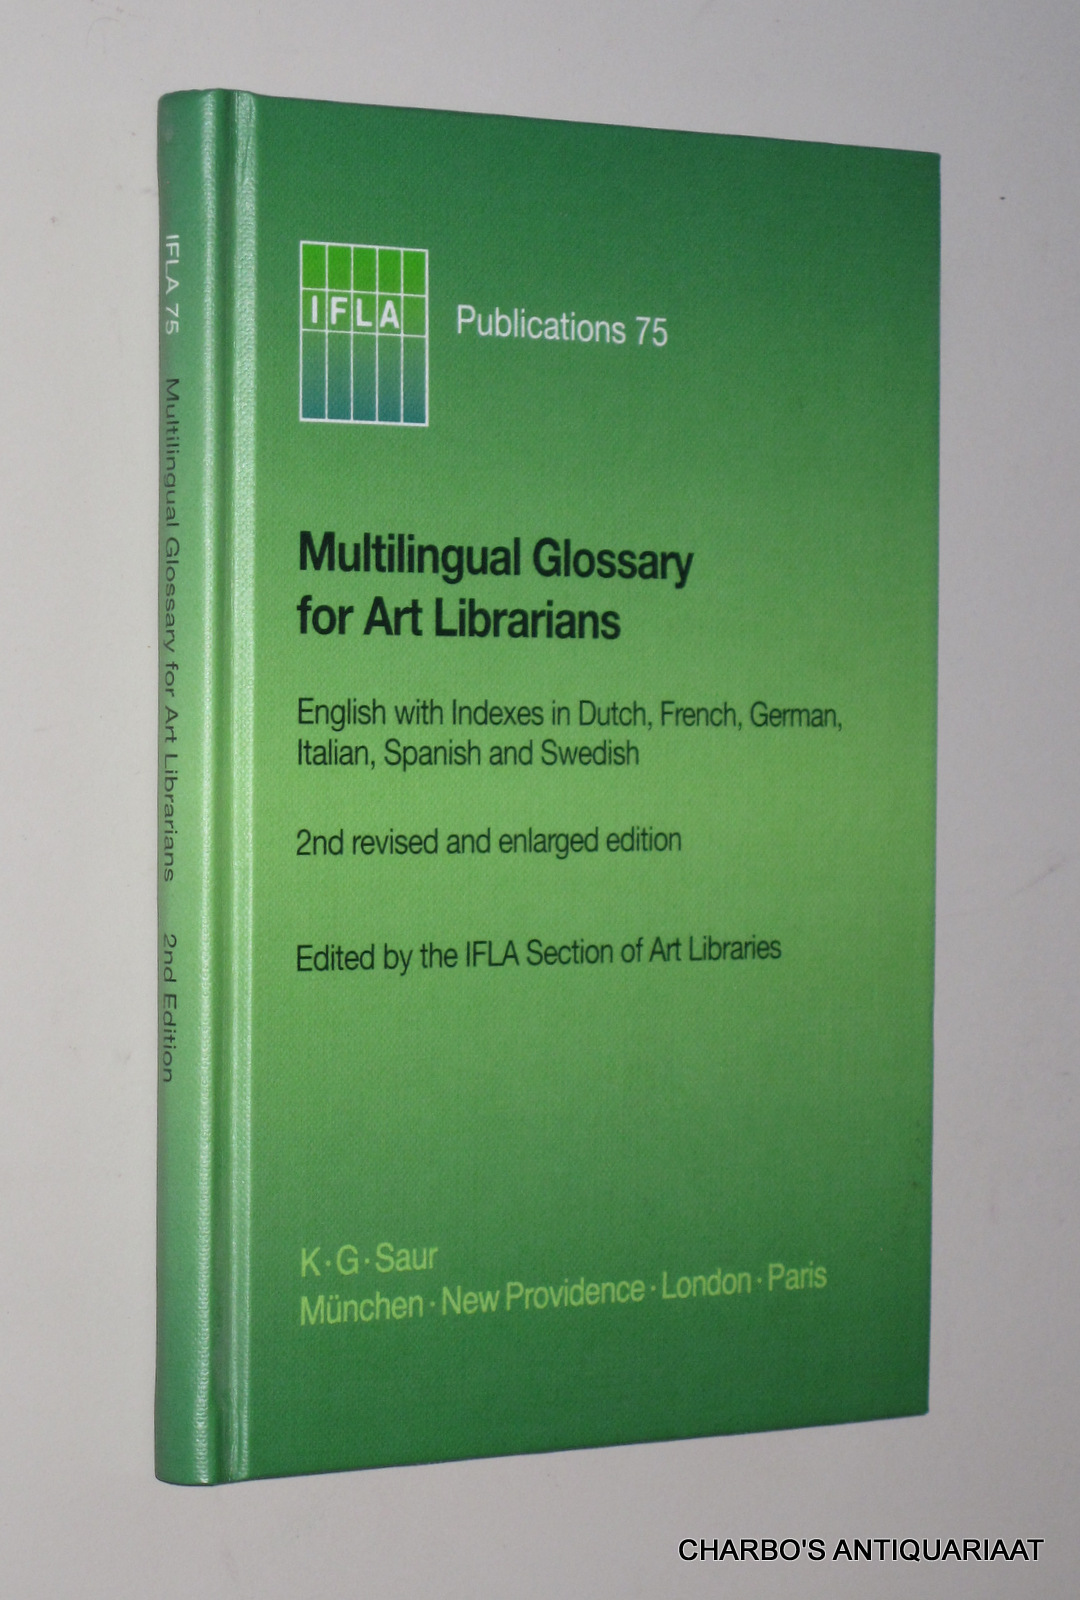 IFLA SECTION OF ART LIBRARIES (ed.), -  Multilingual glossary for art librarians: English with indexes in Dutch, French, German, Italian, Spanish and Swedish.